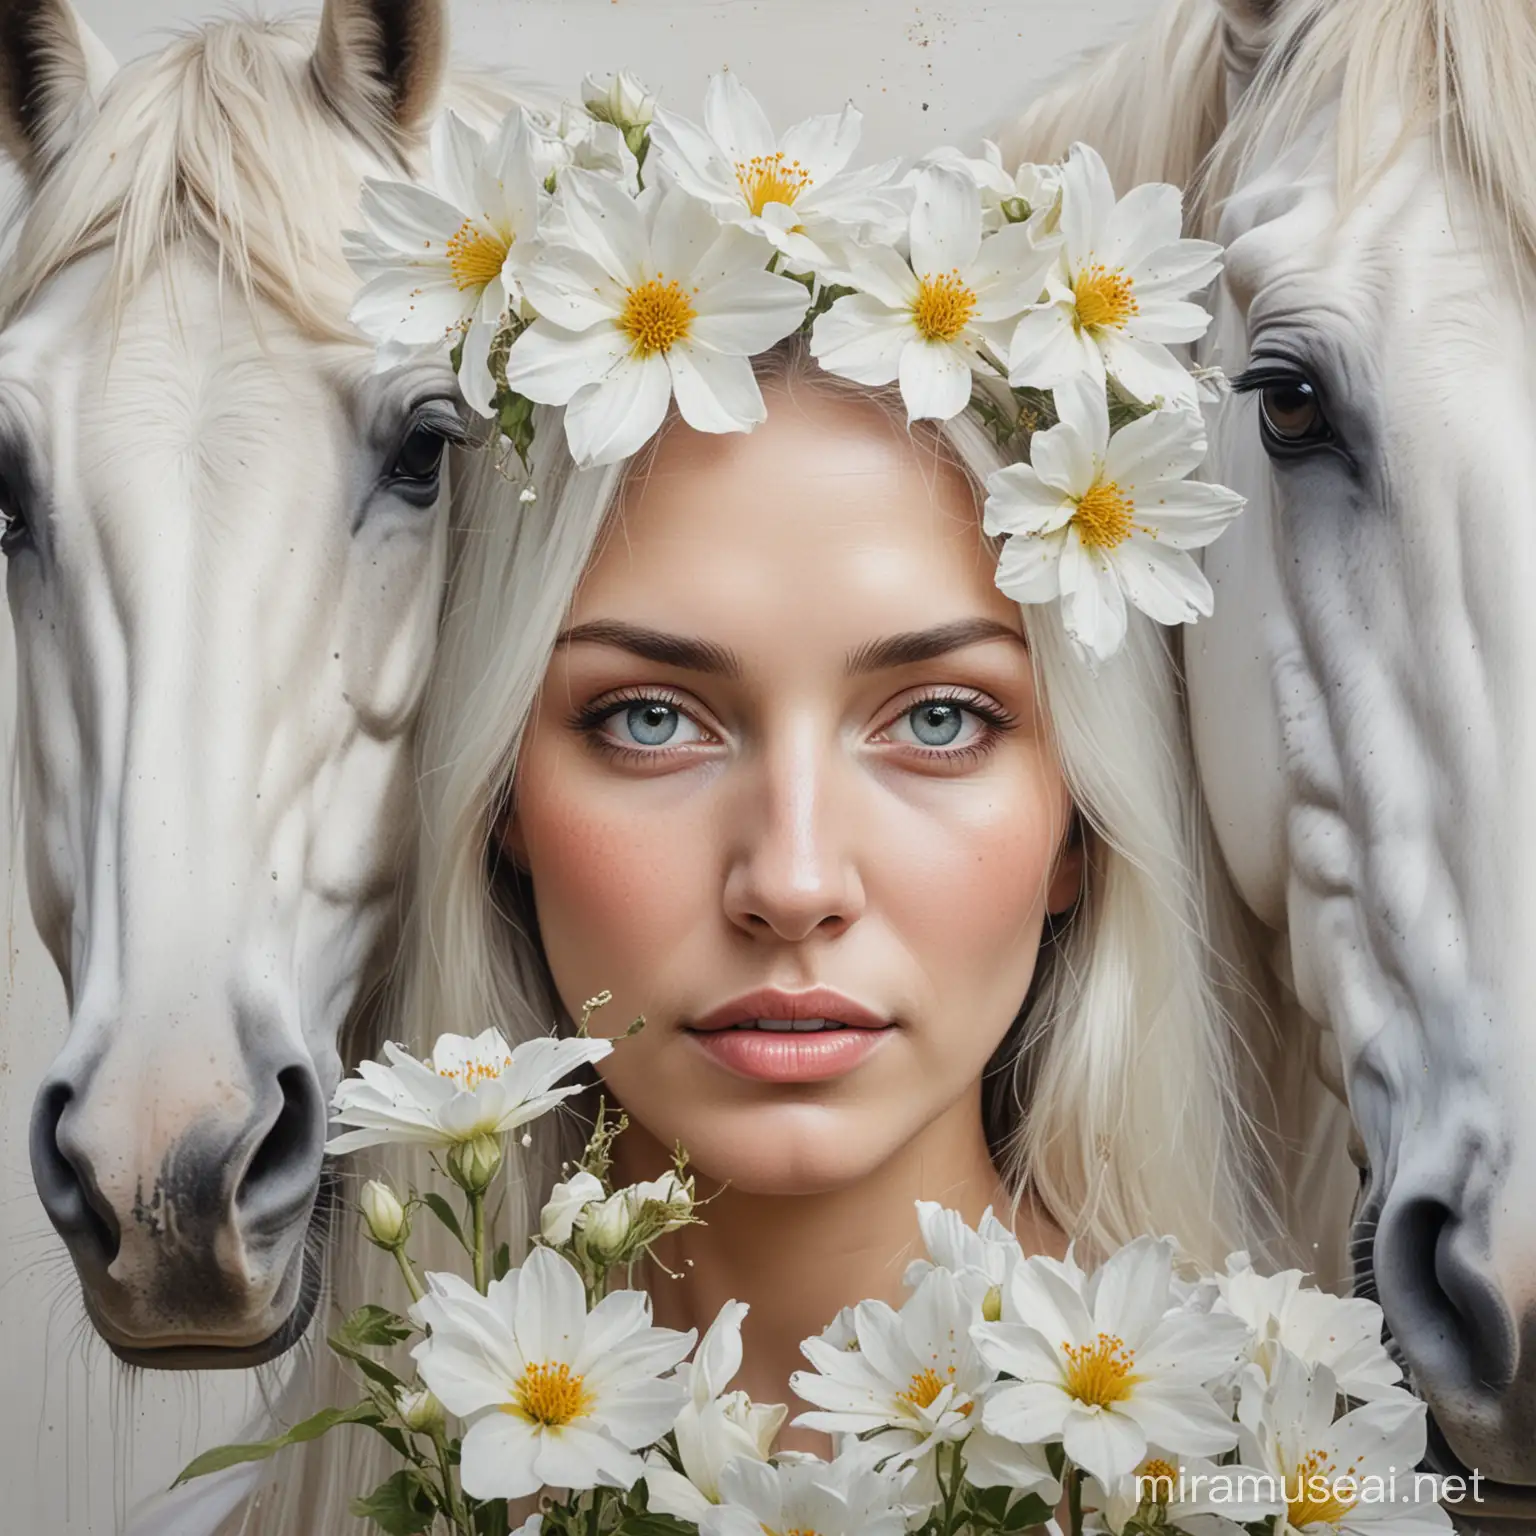 Intense Portrait of a Woman with Horses and Unusual Flower